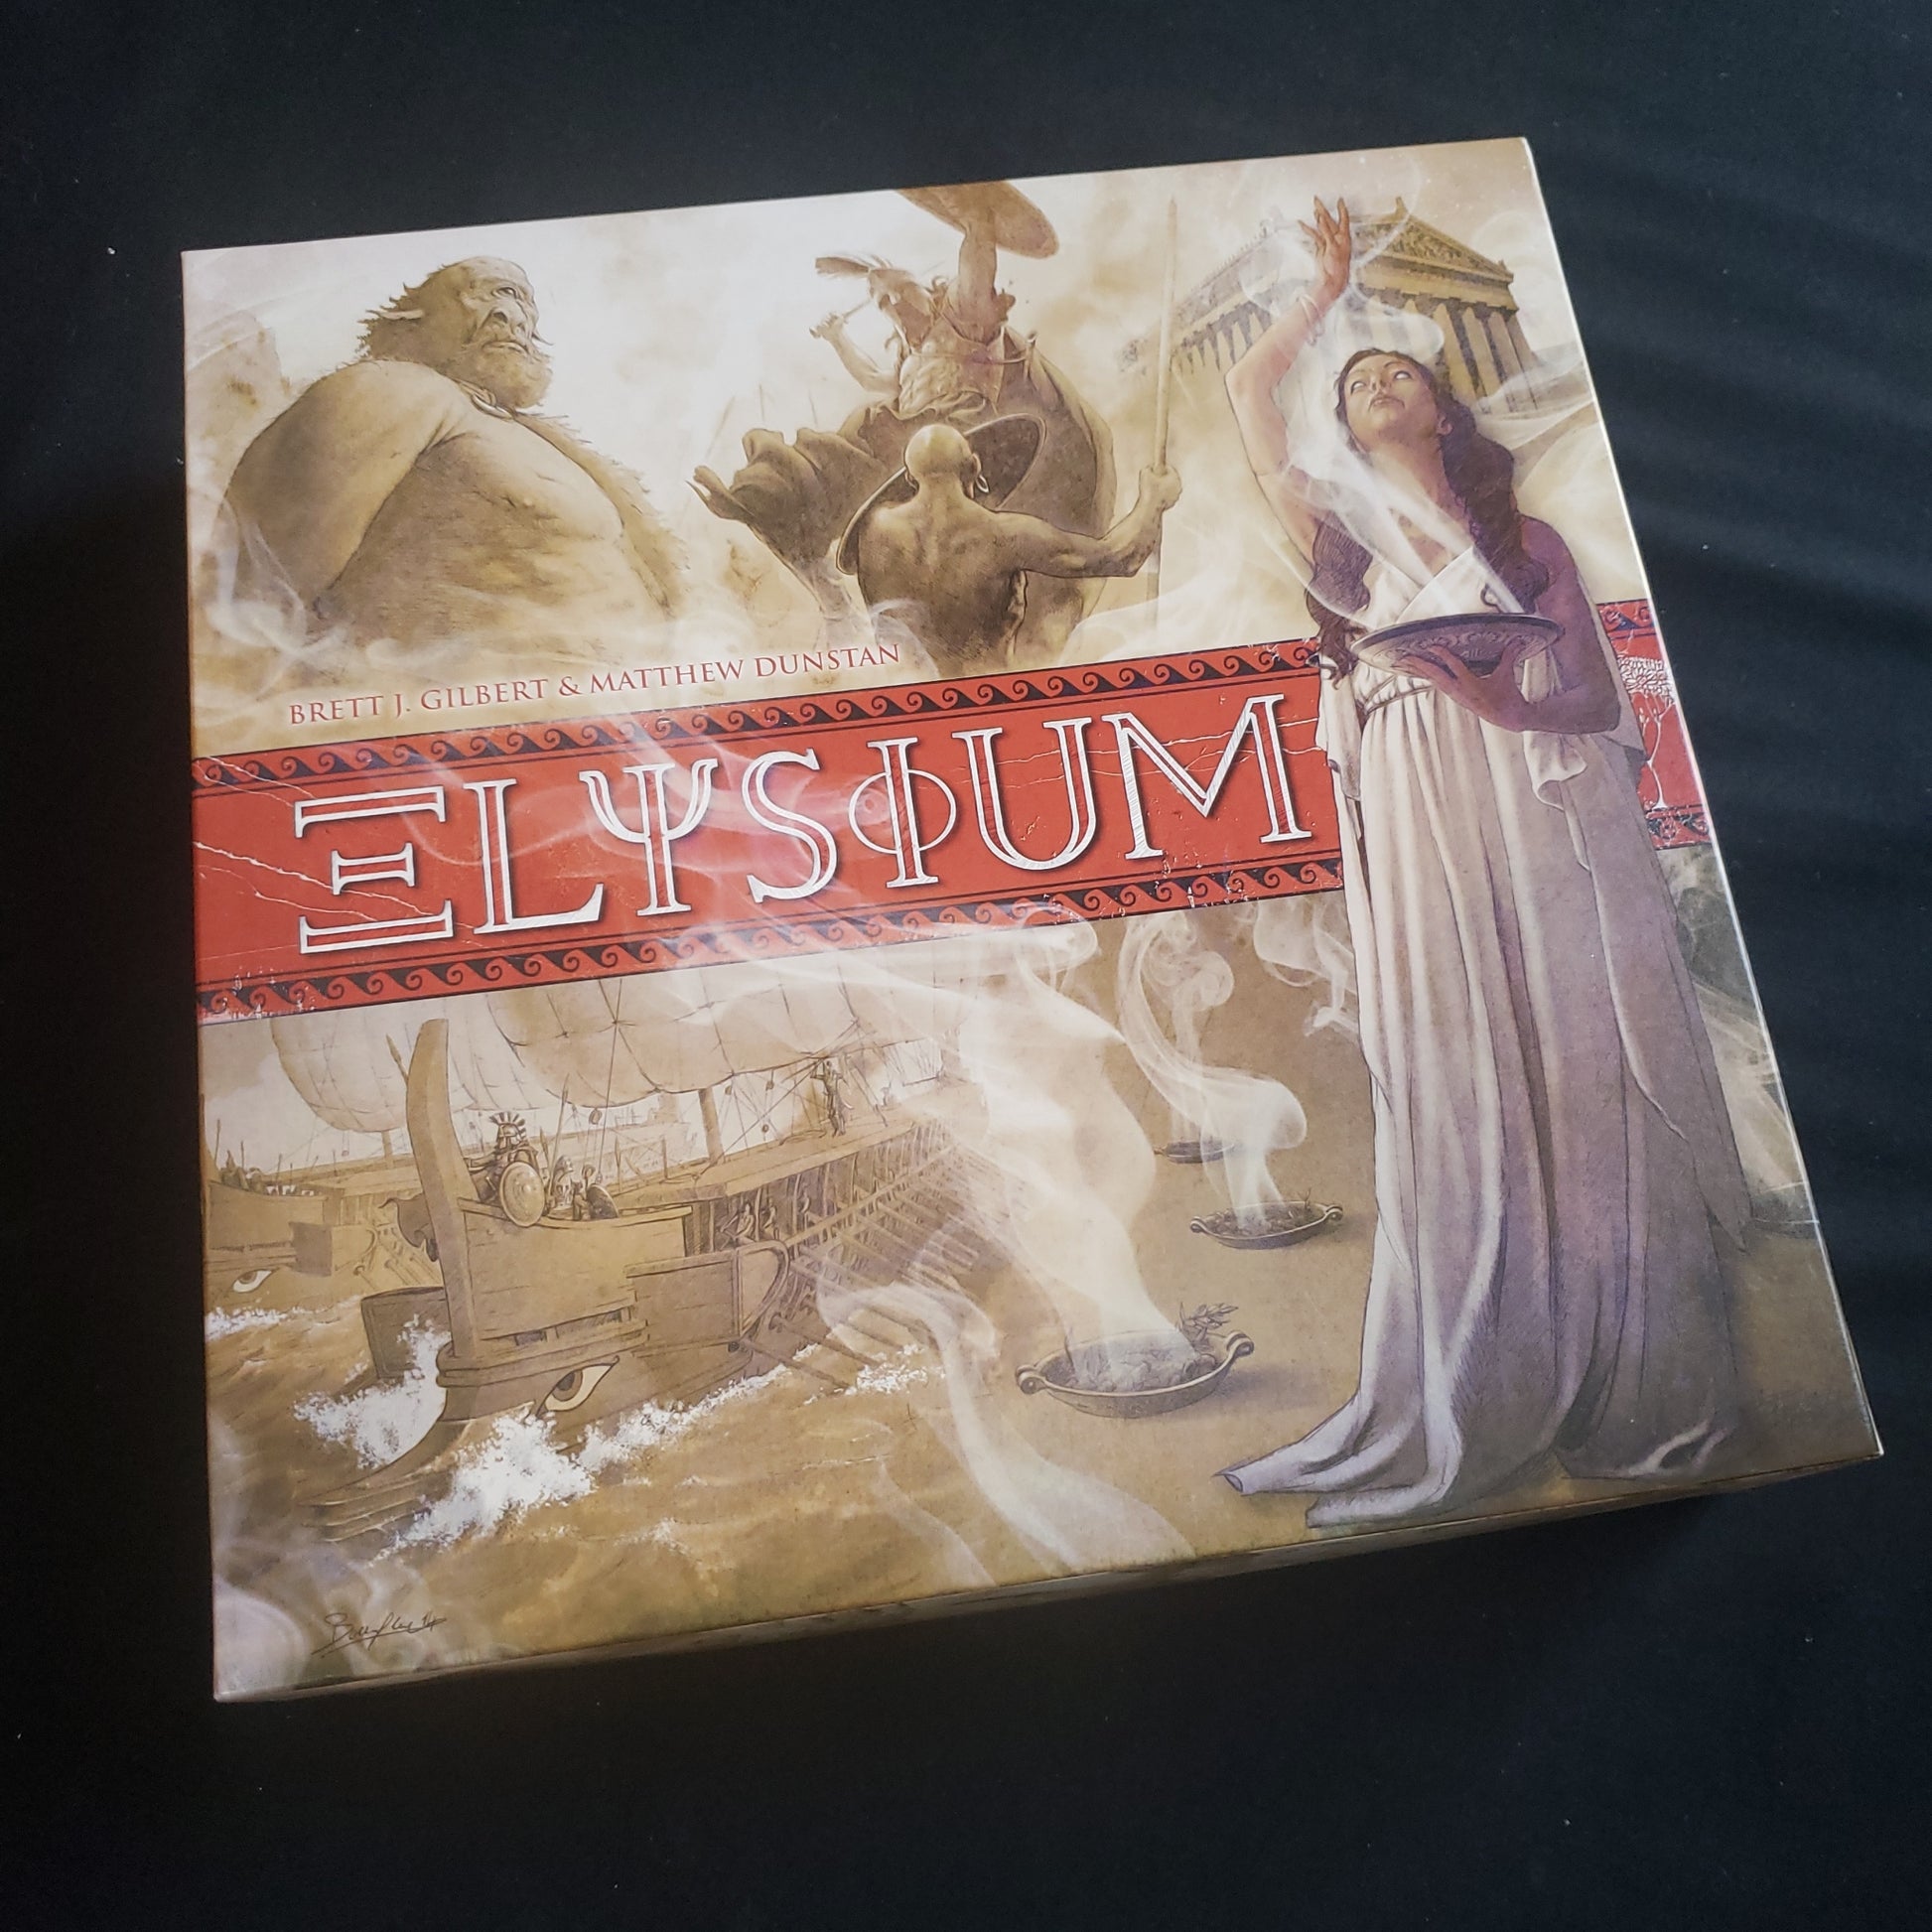 Image shows the front cover of the box of the Elysium board game